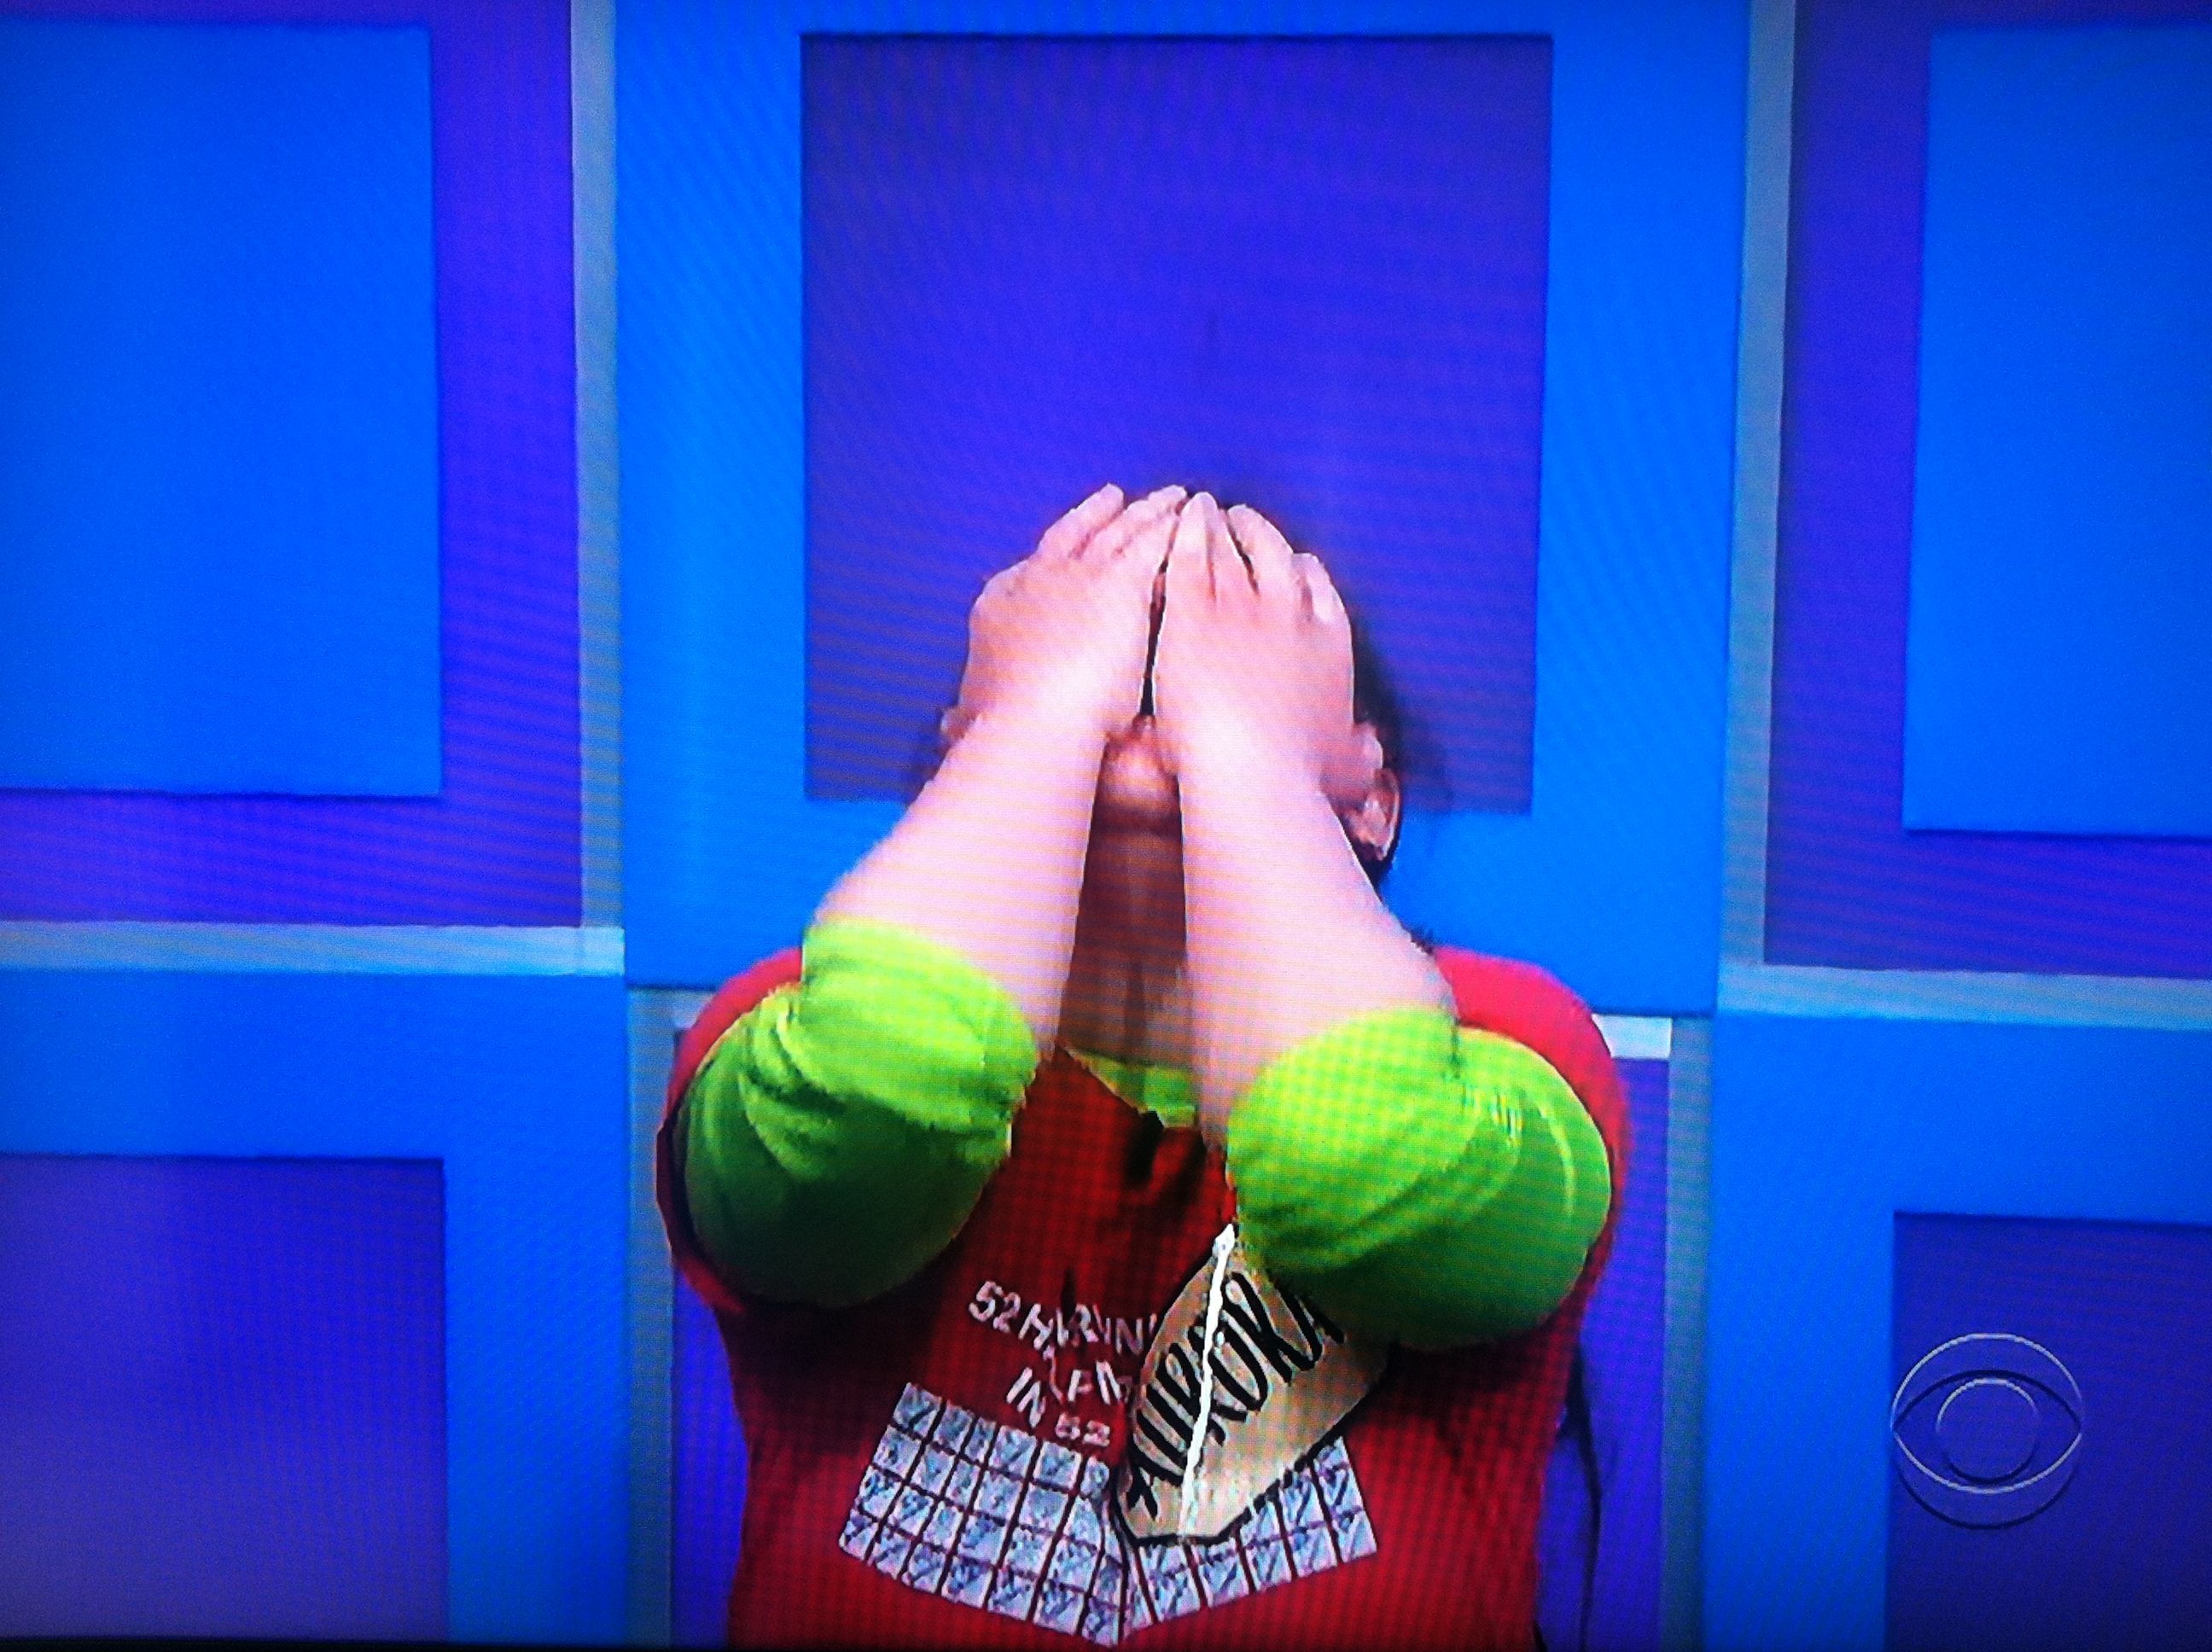 Aurora De Lucia kneeling down with her hands over her face after she learns she's playing for a brand new car on The Price is Right